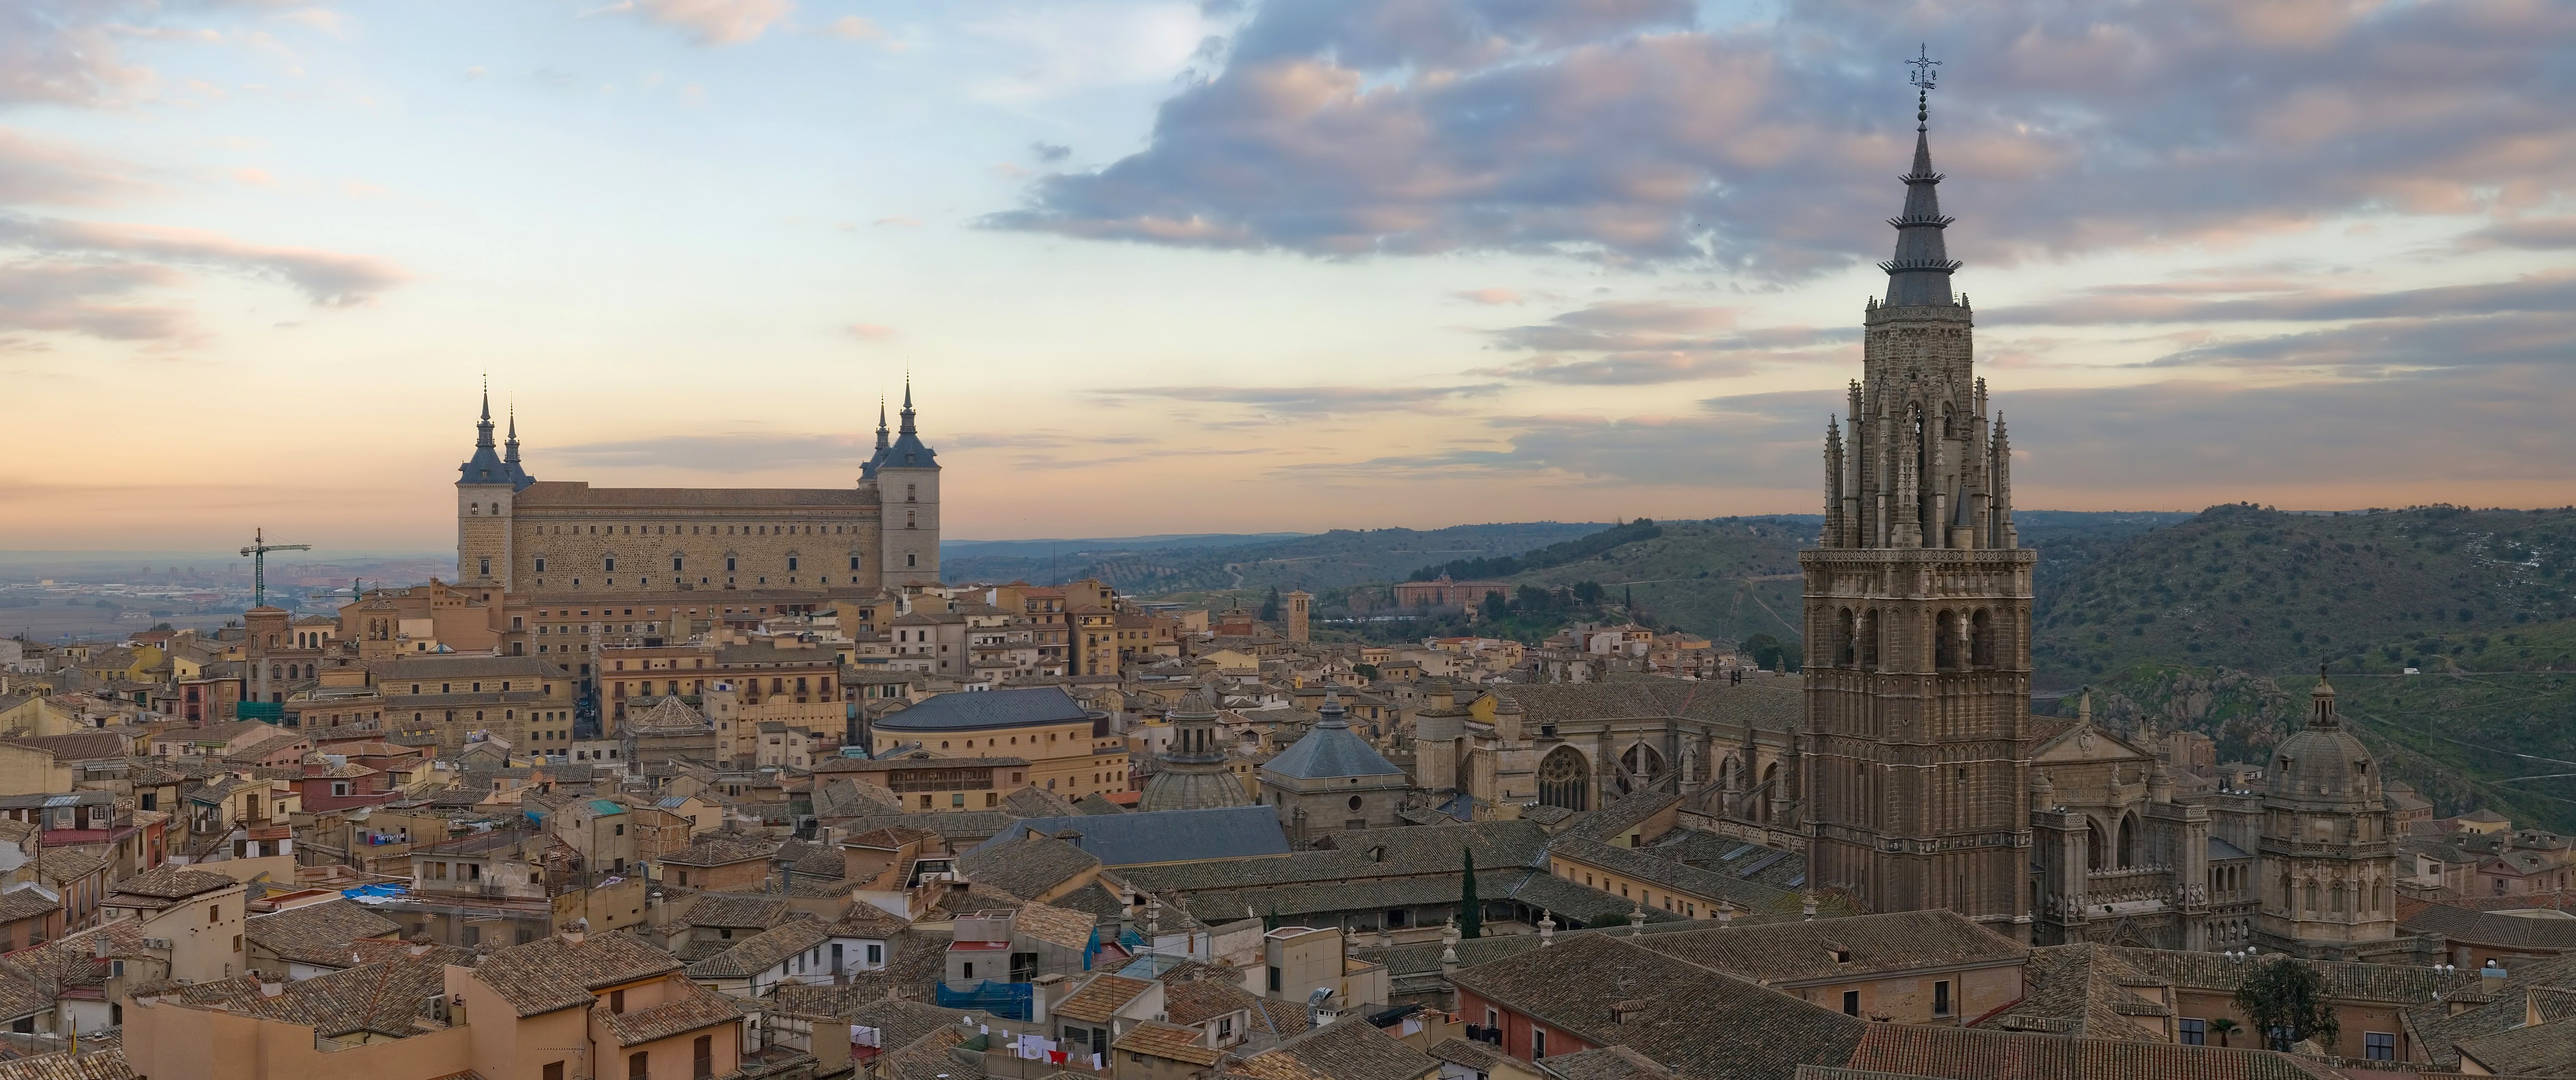 City Toledo Old Building Cathedral Fort 4748x1990